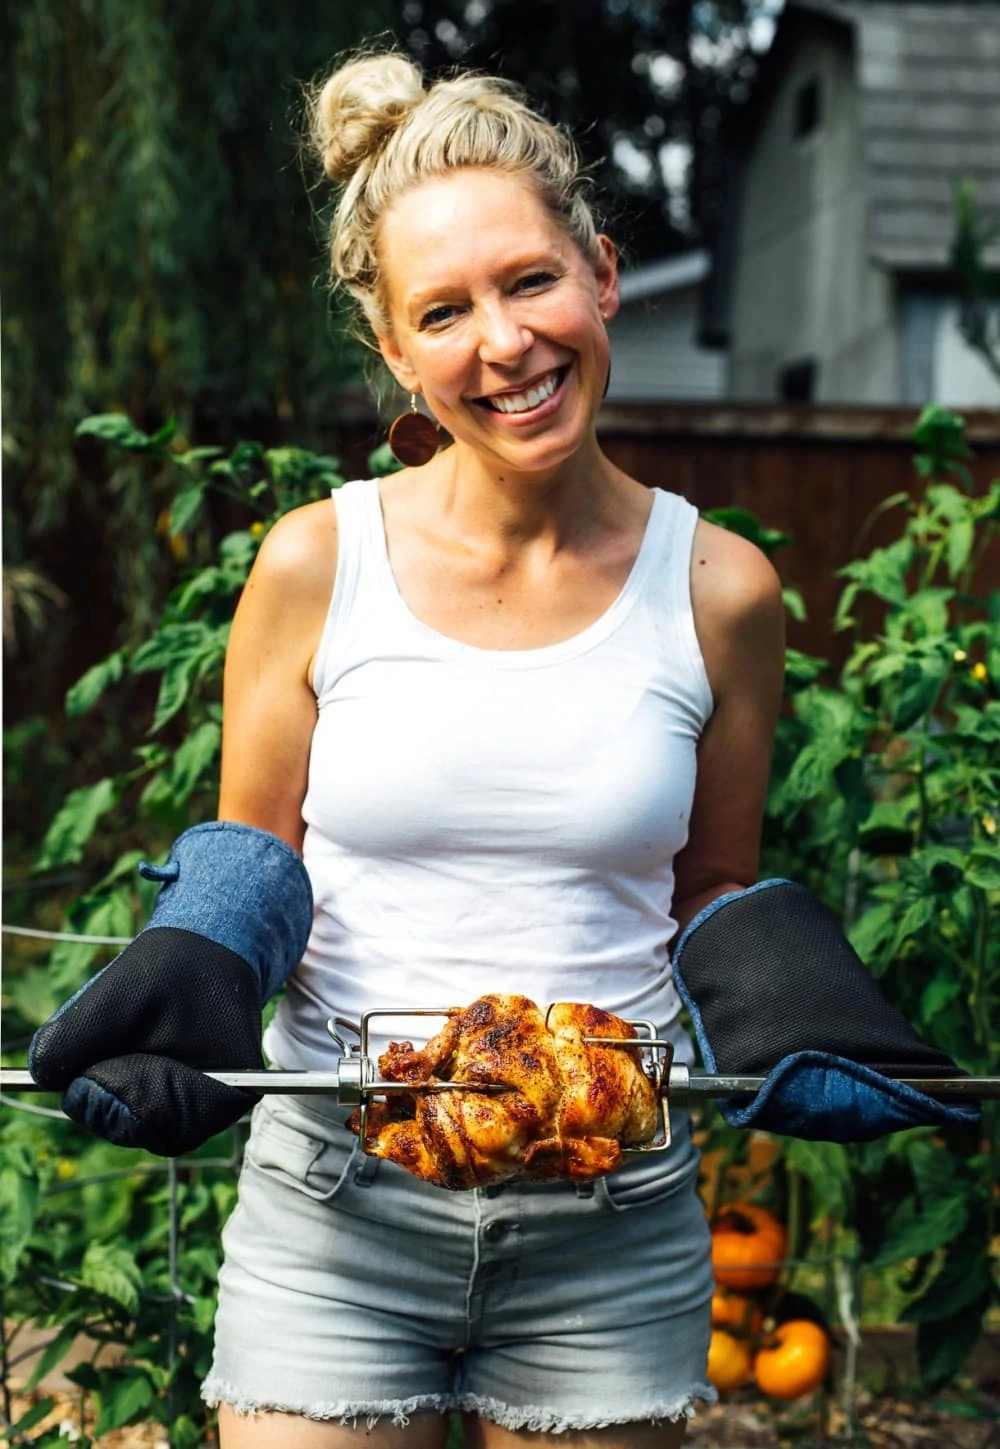 girl holding rotisserie chicken in front of garden. she is wearing white tanktop and grey shorts